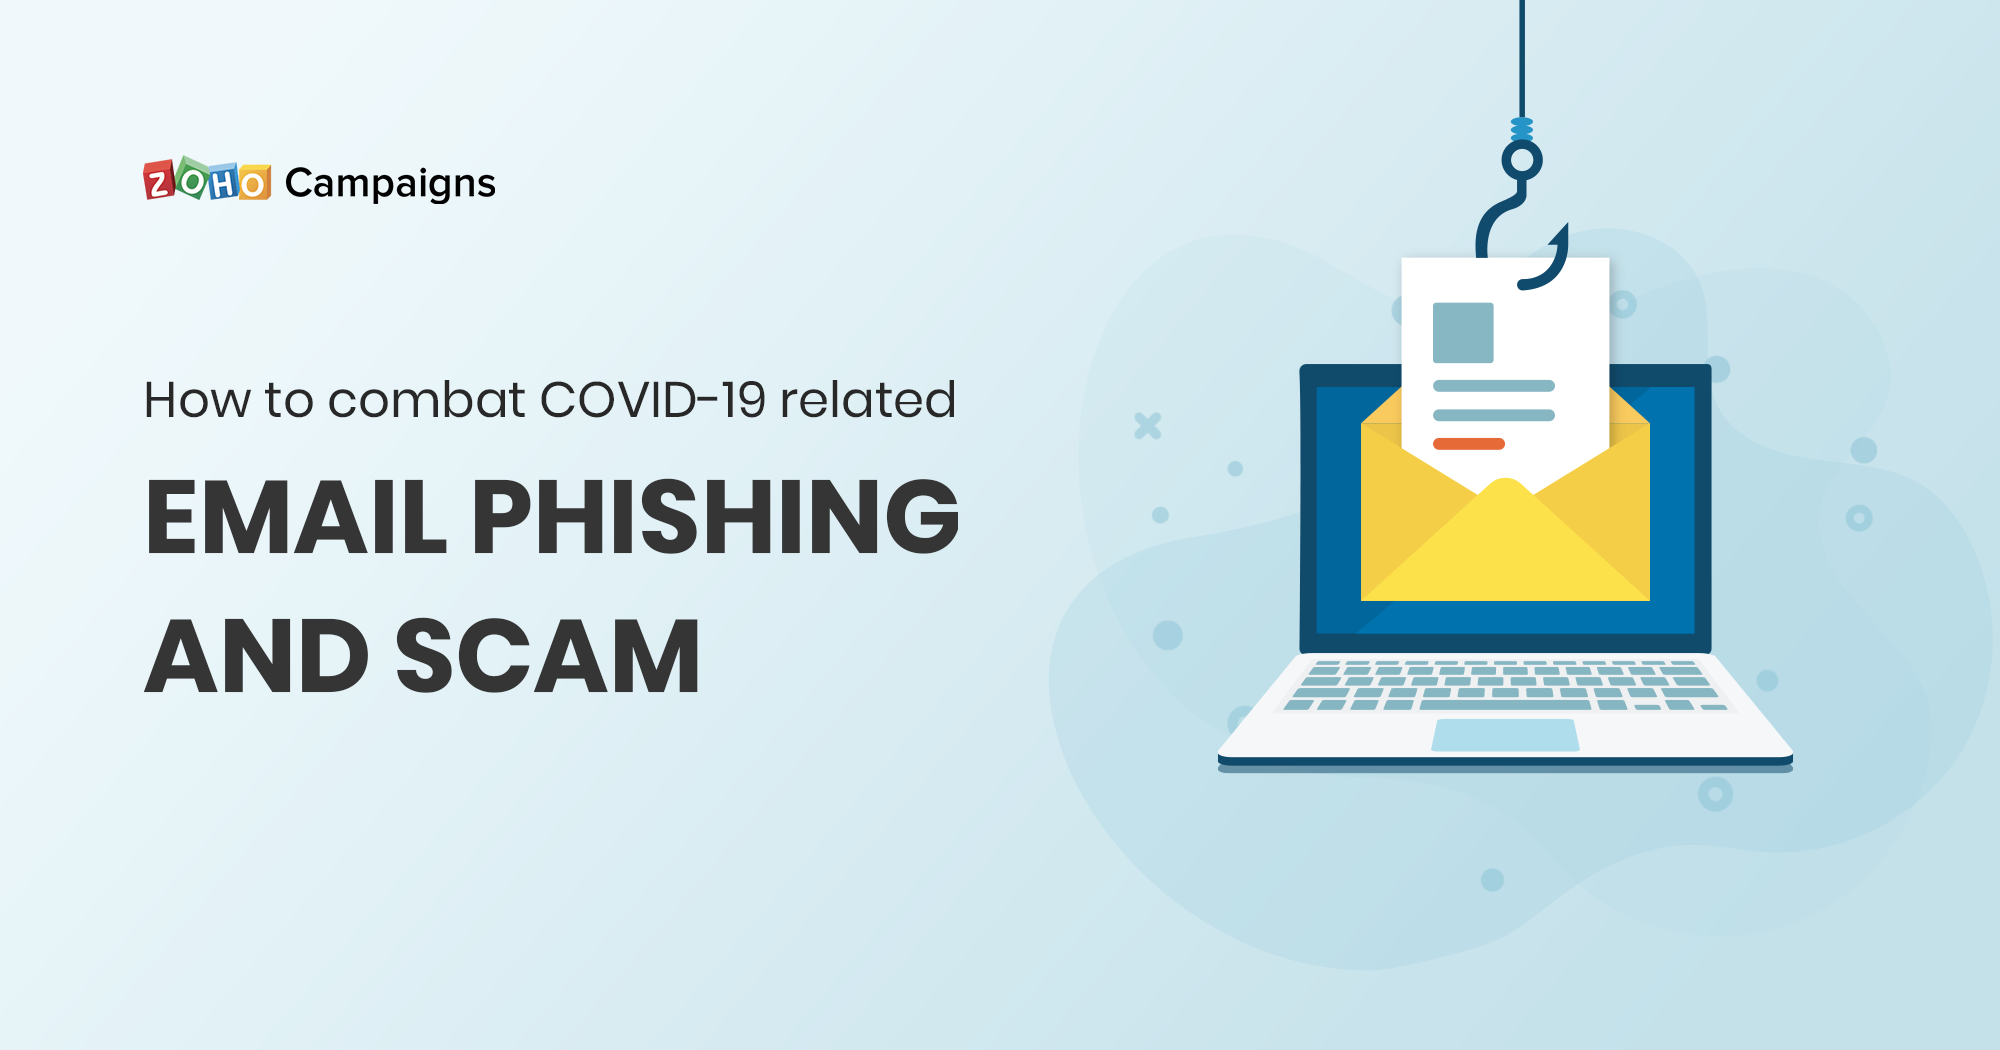 How to combat email phishing and scams related to COVID-19